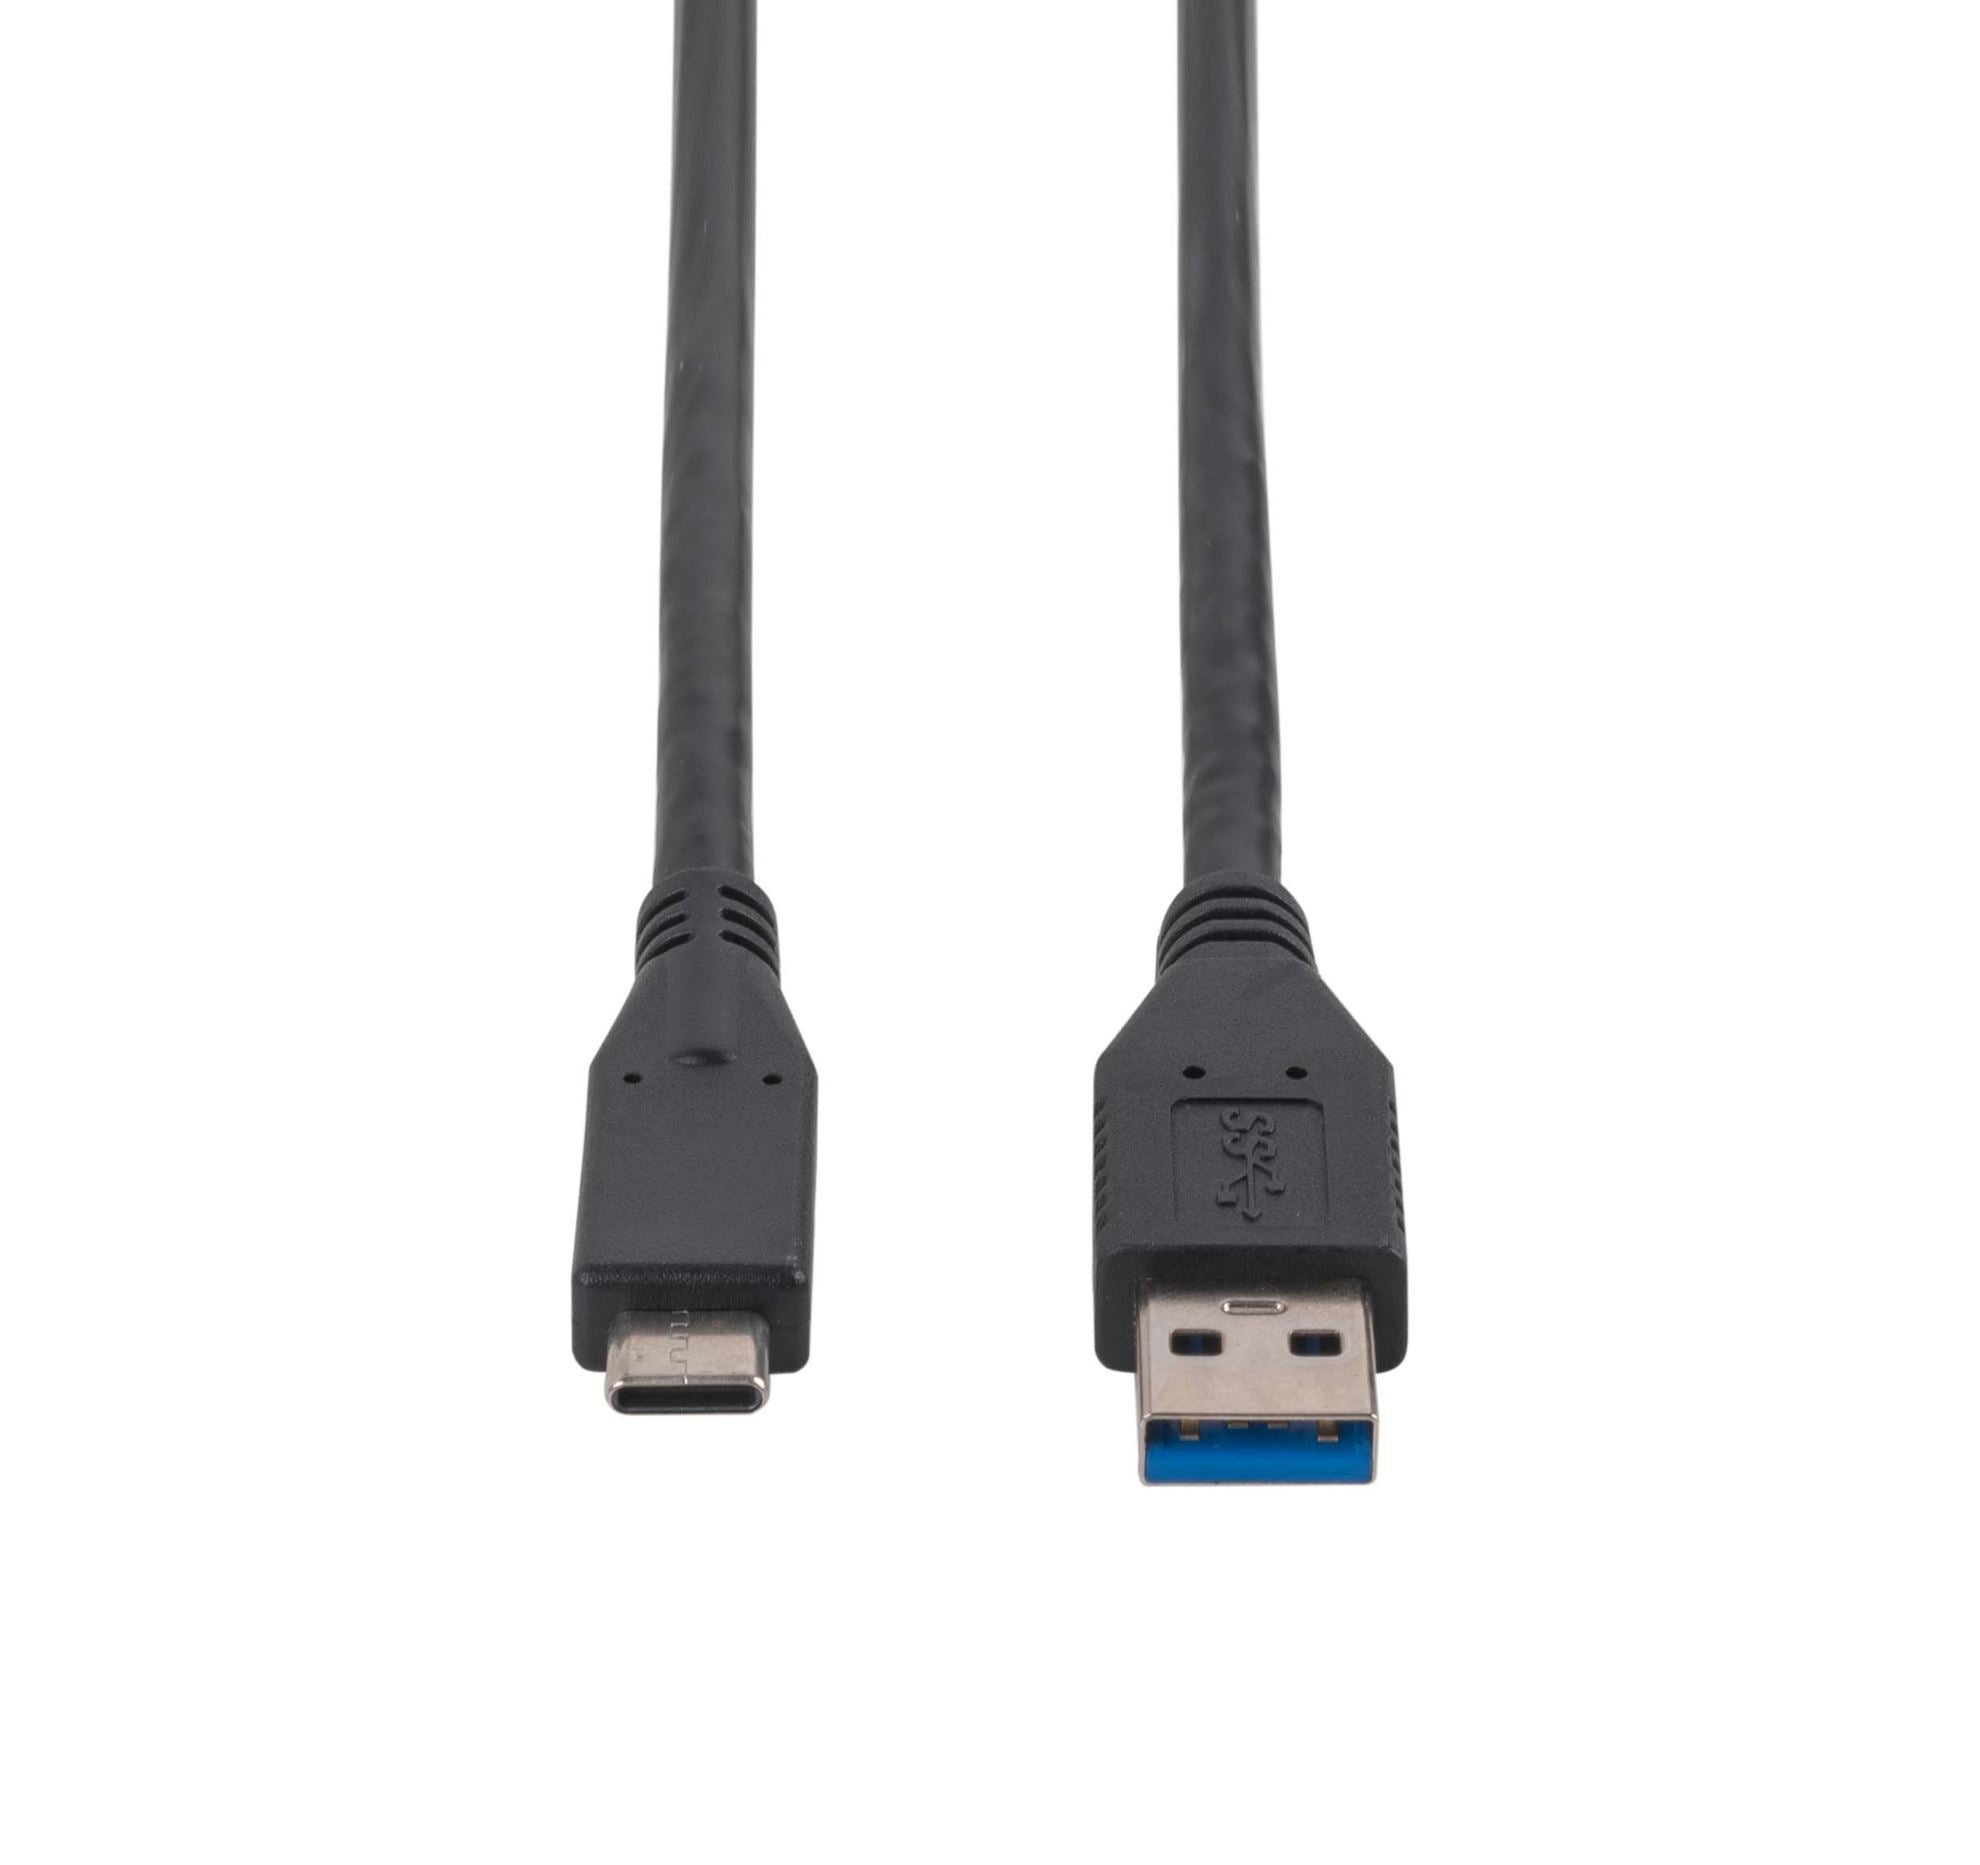 DYNAMIX_0.2M,_USB_3.1_USB-C_Male_to_USB-A_Male_Cable._Black_Colour._Up_to_10G_Data_Transfer_Speed,_Supports_3A_Current. 1131